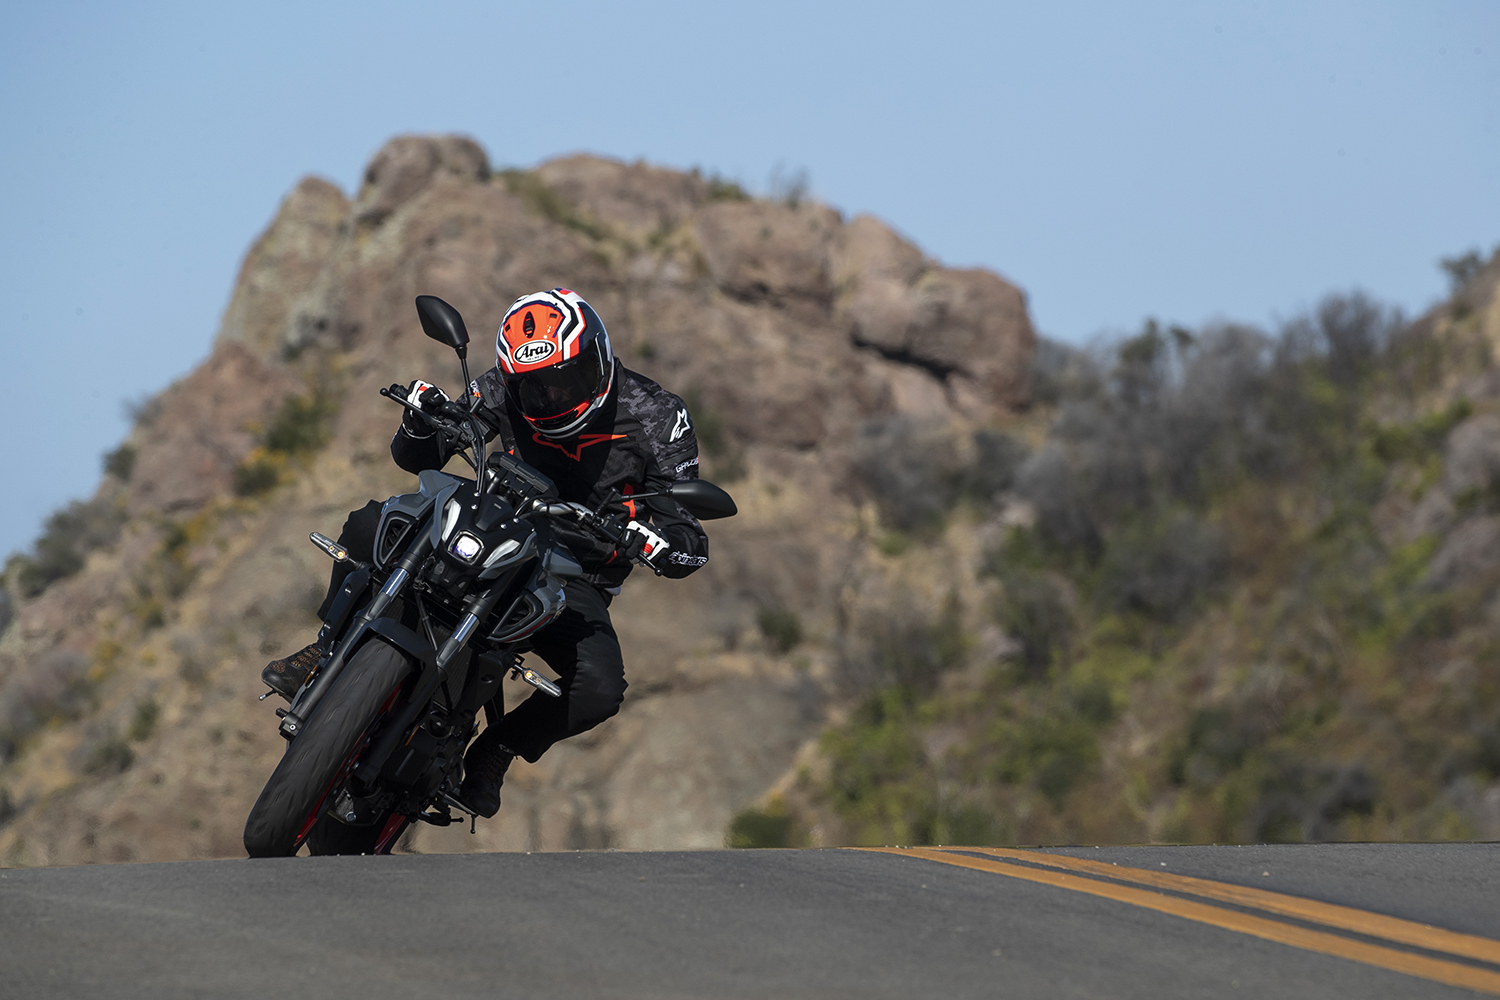 Testing the 2021 Yamaha MT-07 : I traded my 2006 Sportster !